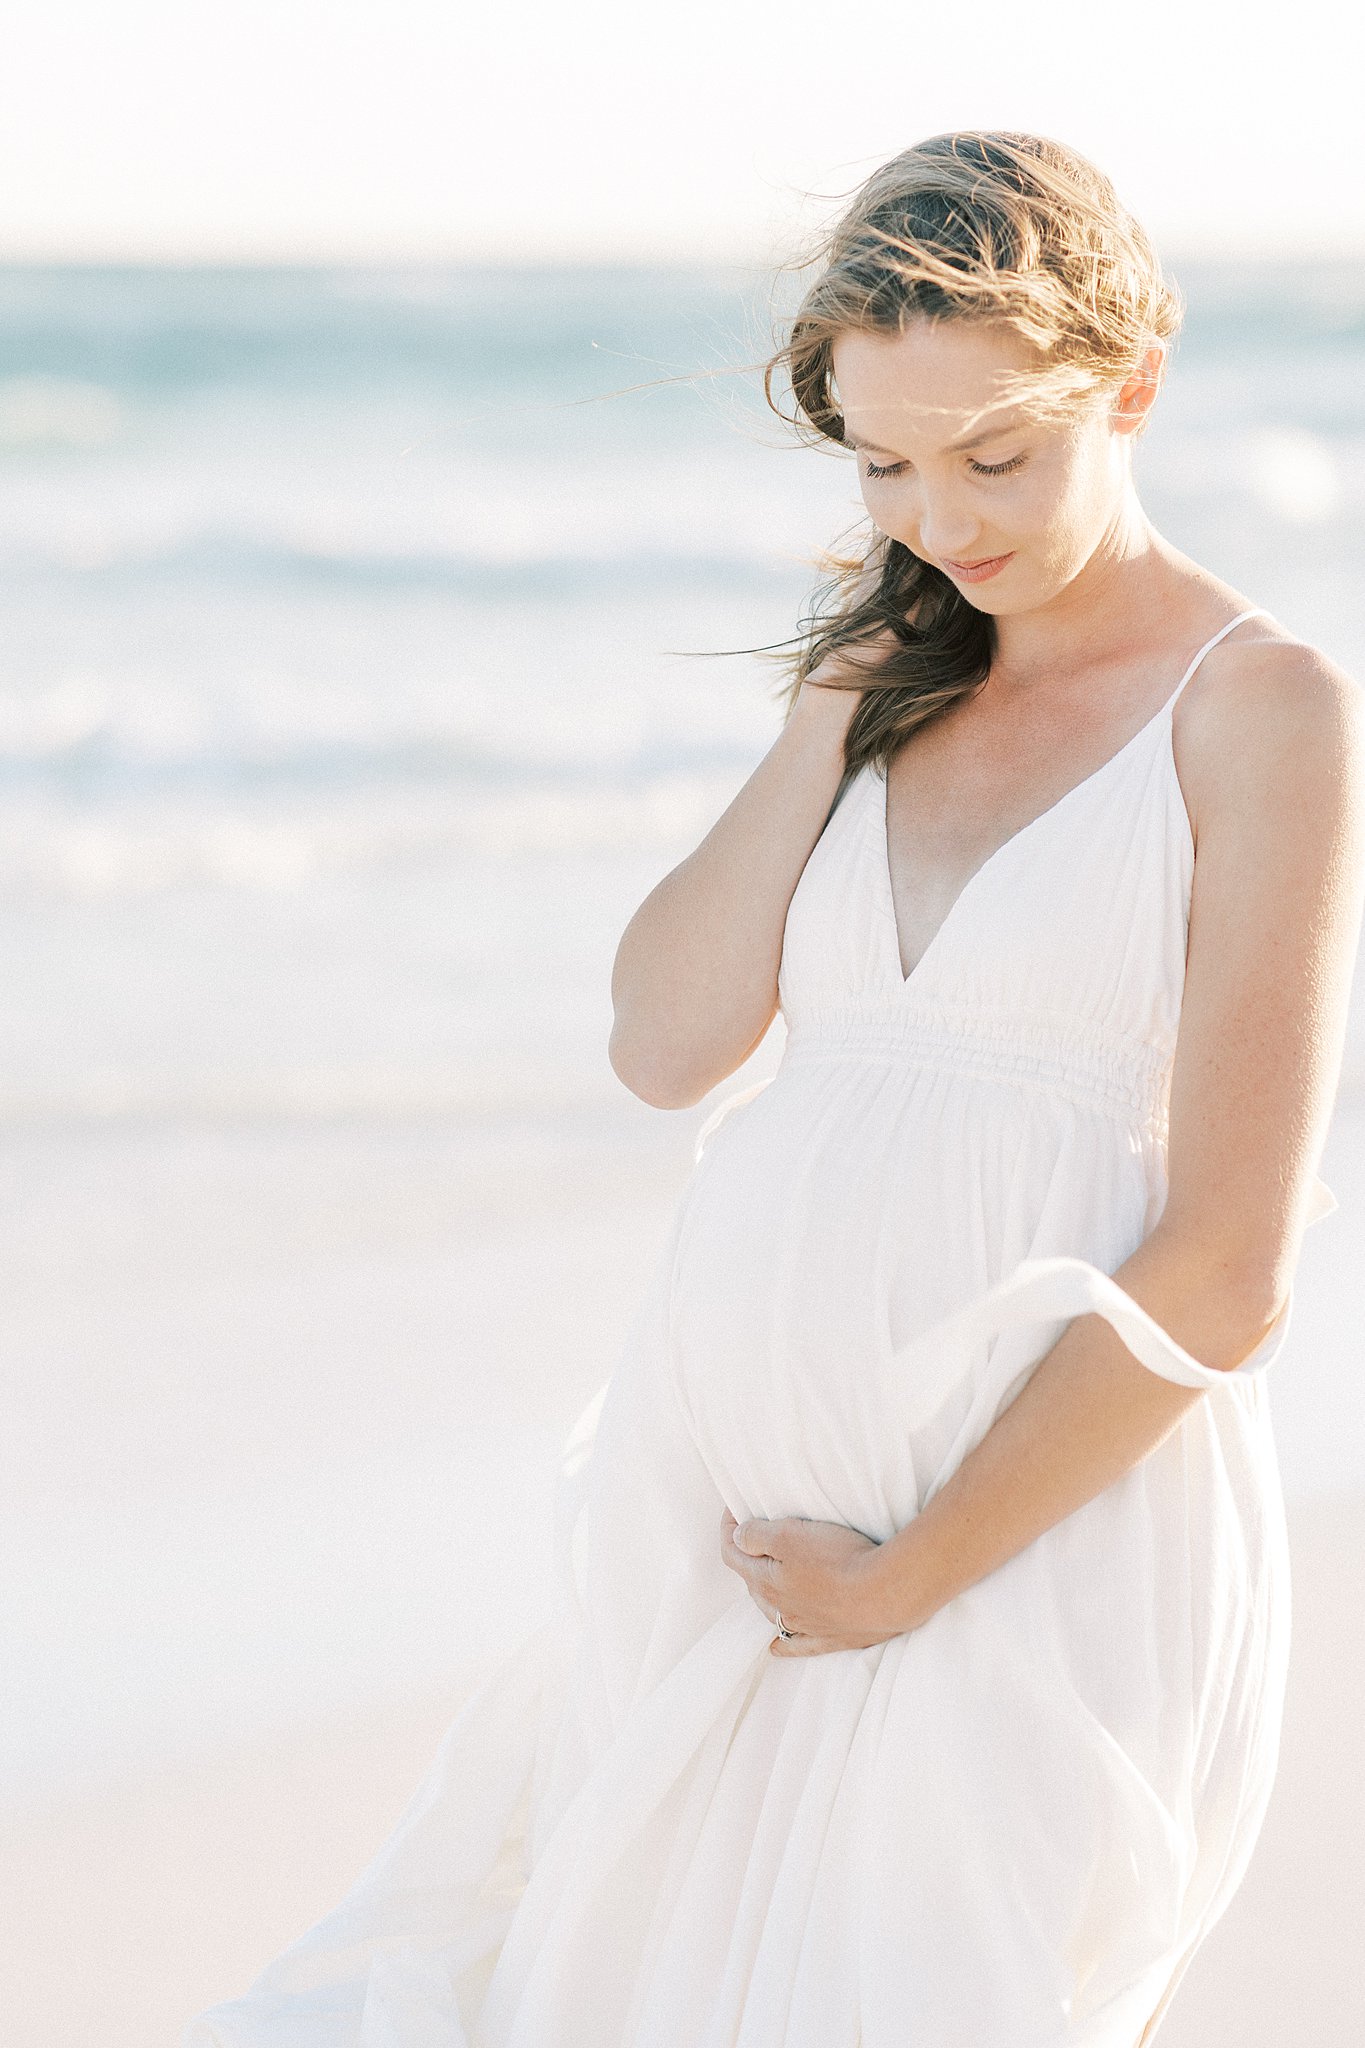 A mom to be stands on a windy beach in a white maternity dress holding her bump Childbirth Classes Dallas